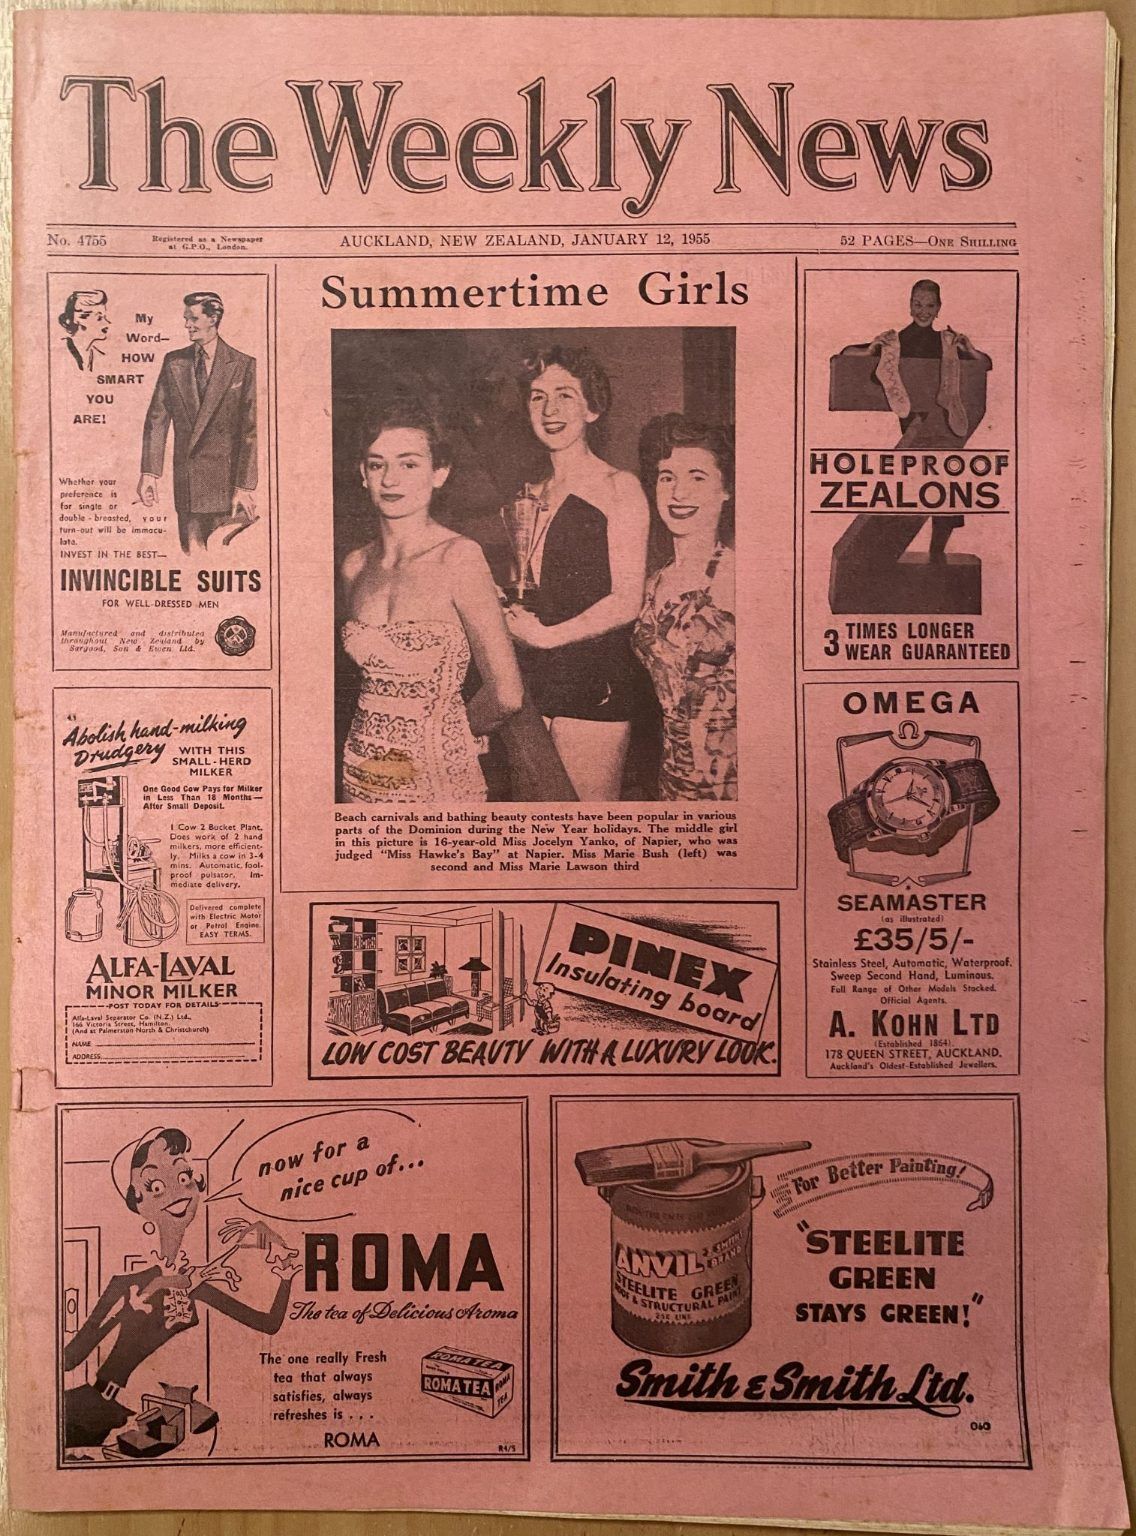 OLD NEWSPAPER: The Weekly News - No. 4755, 12 January 1955